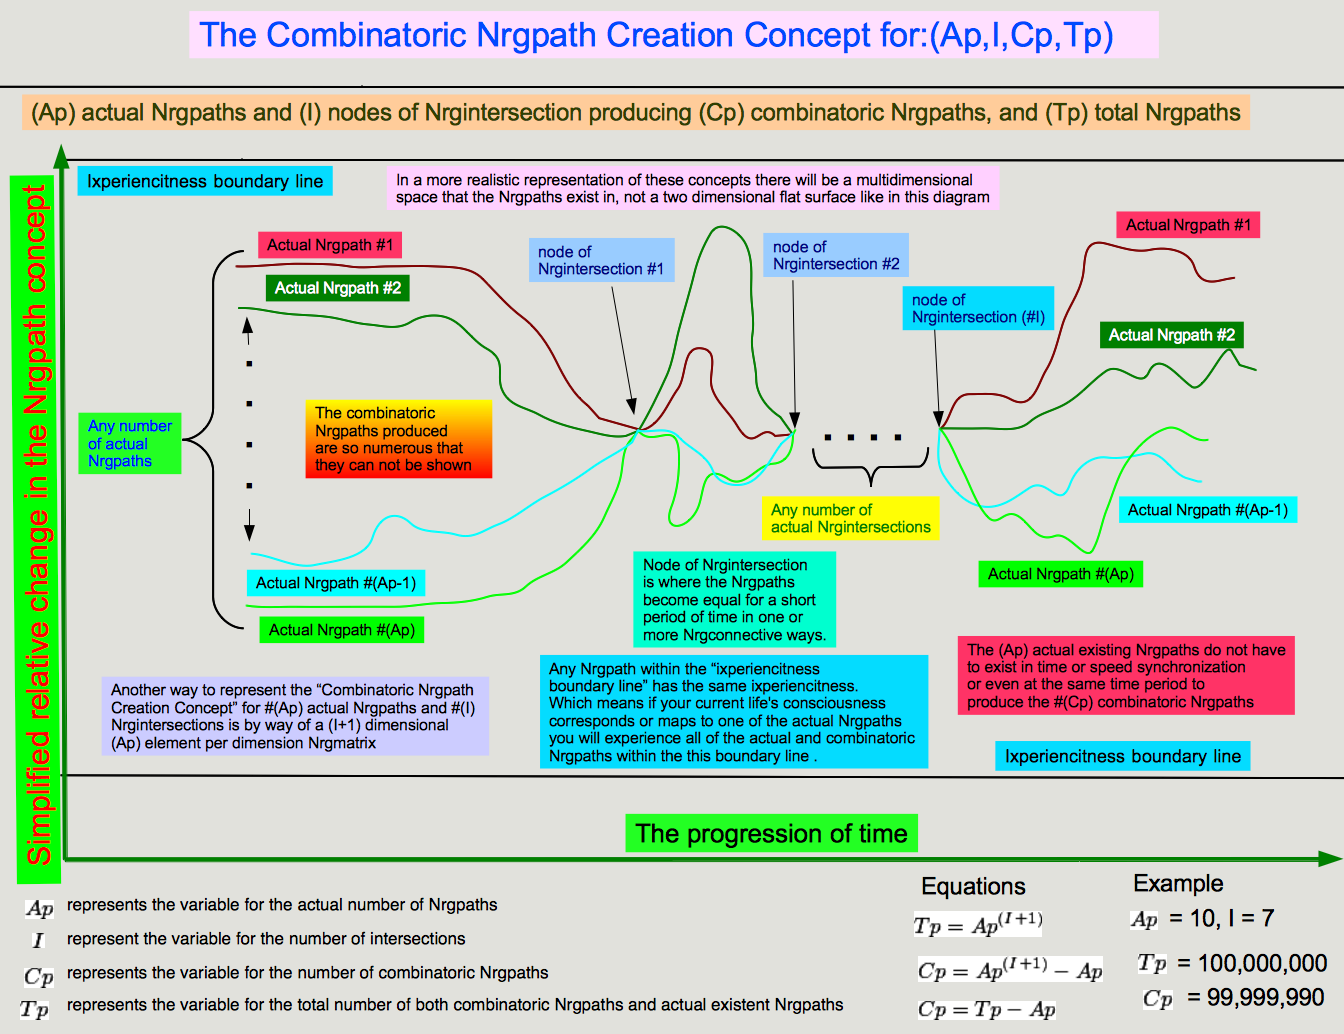 The Combinatoric Nrgpath Creation Concept for-(Ap,I,Cp,Tp).png